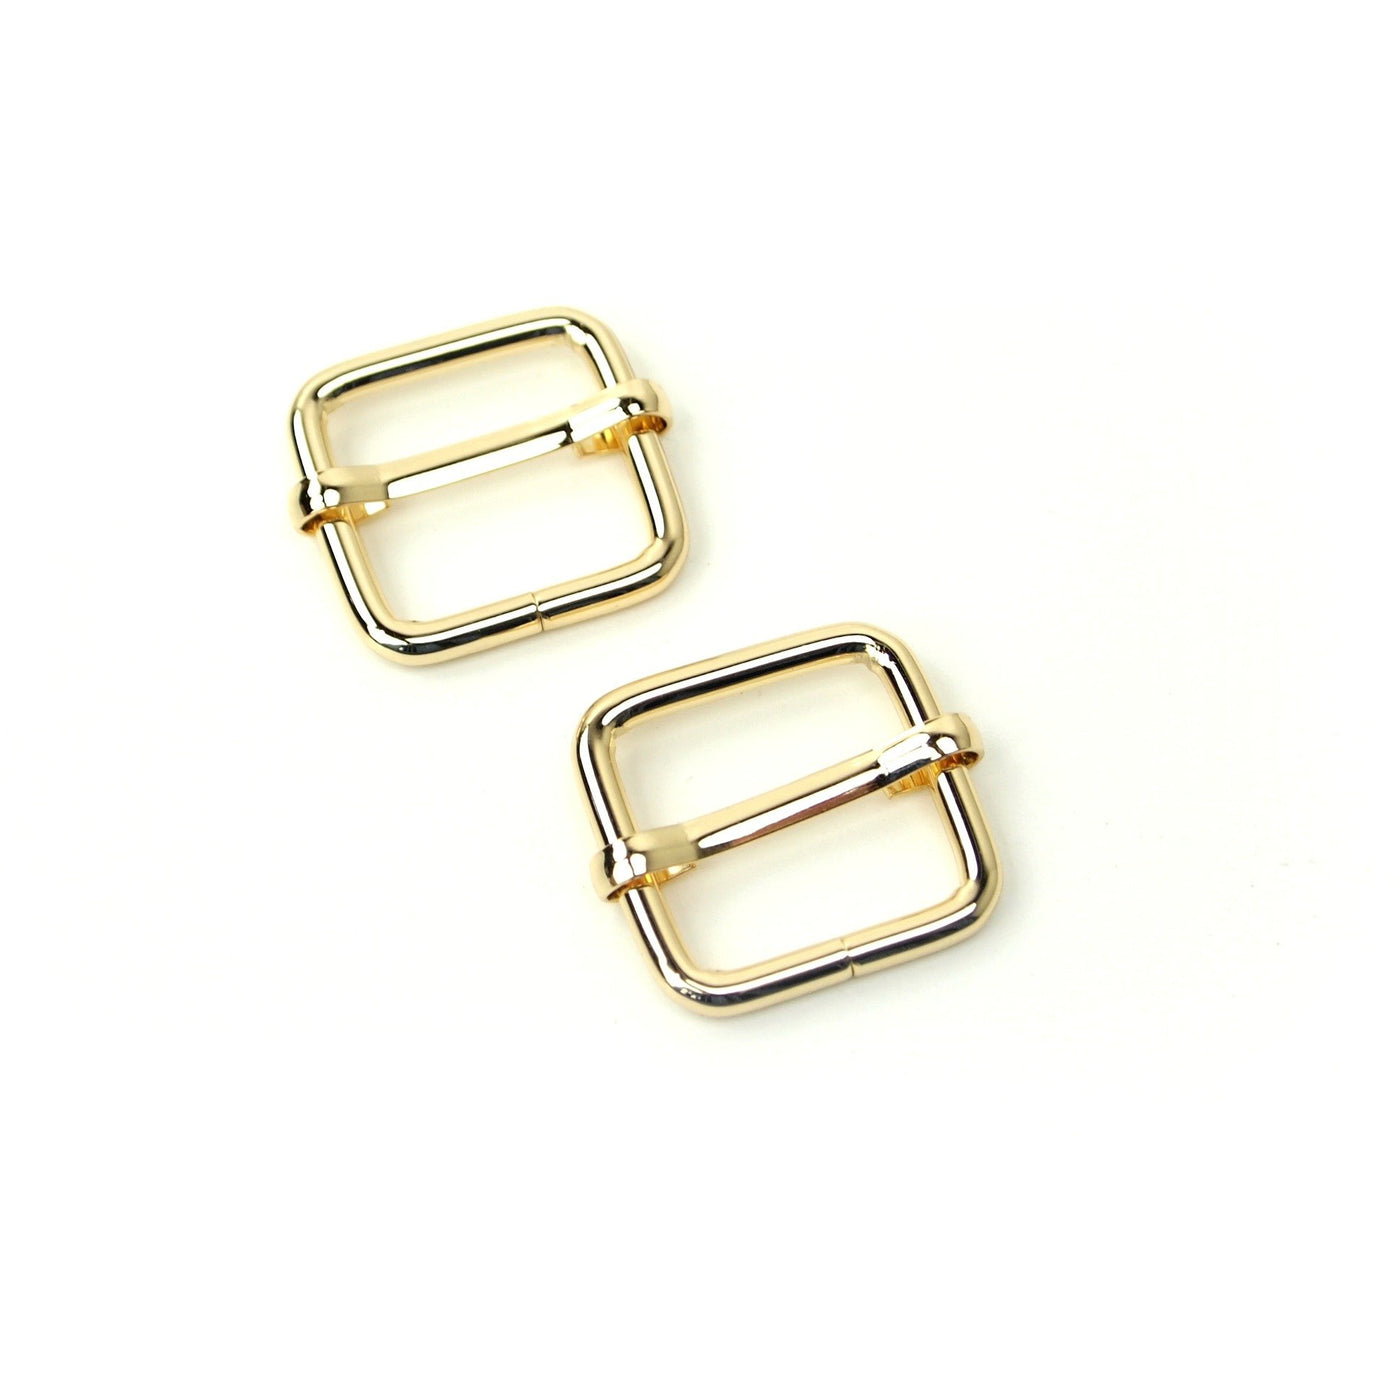 Two 3/4" Slider Buckles